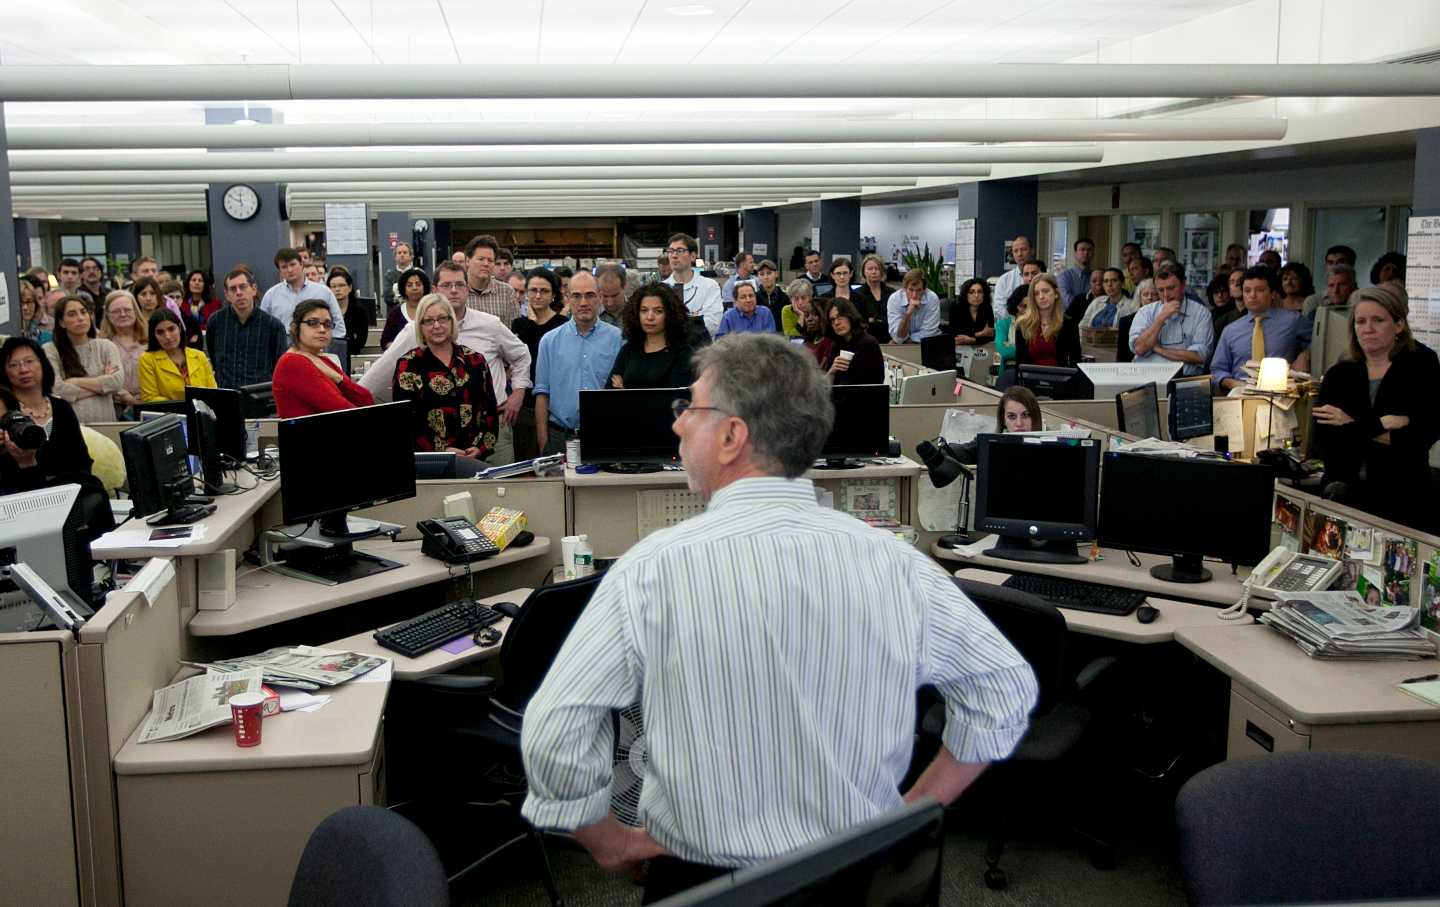 Martin Baron announcing that he is leaving The Boston Globe to become the executive editor of The Washington Post.